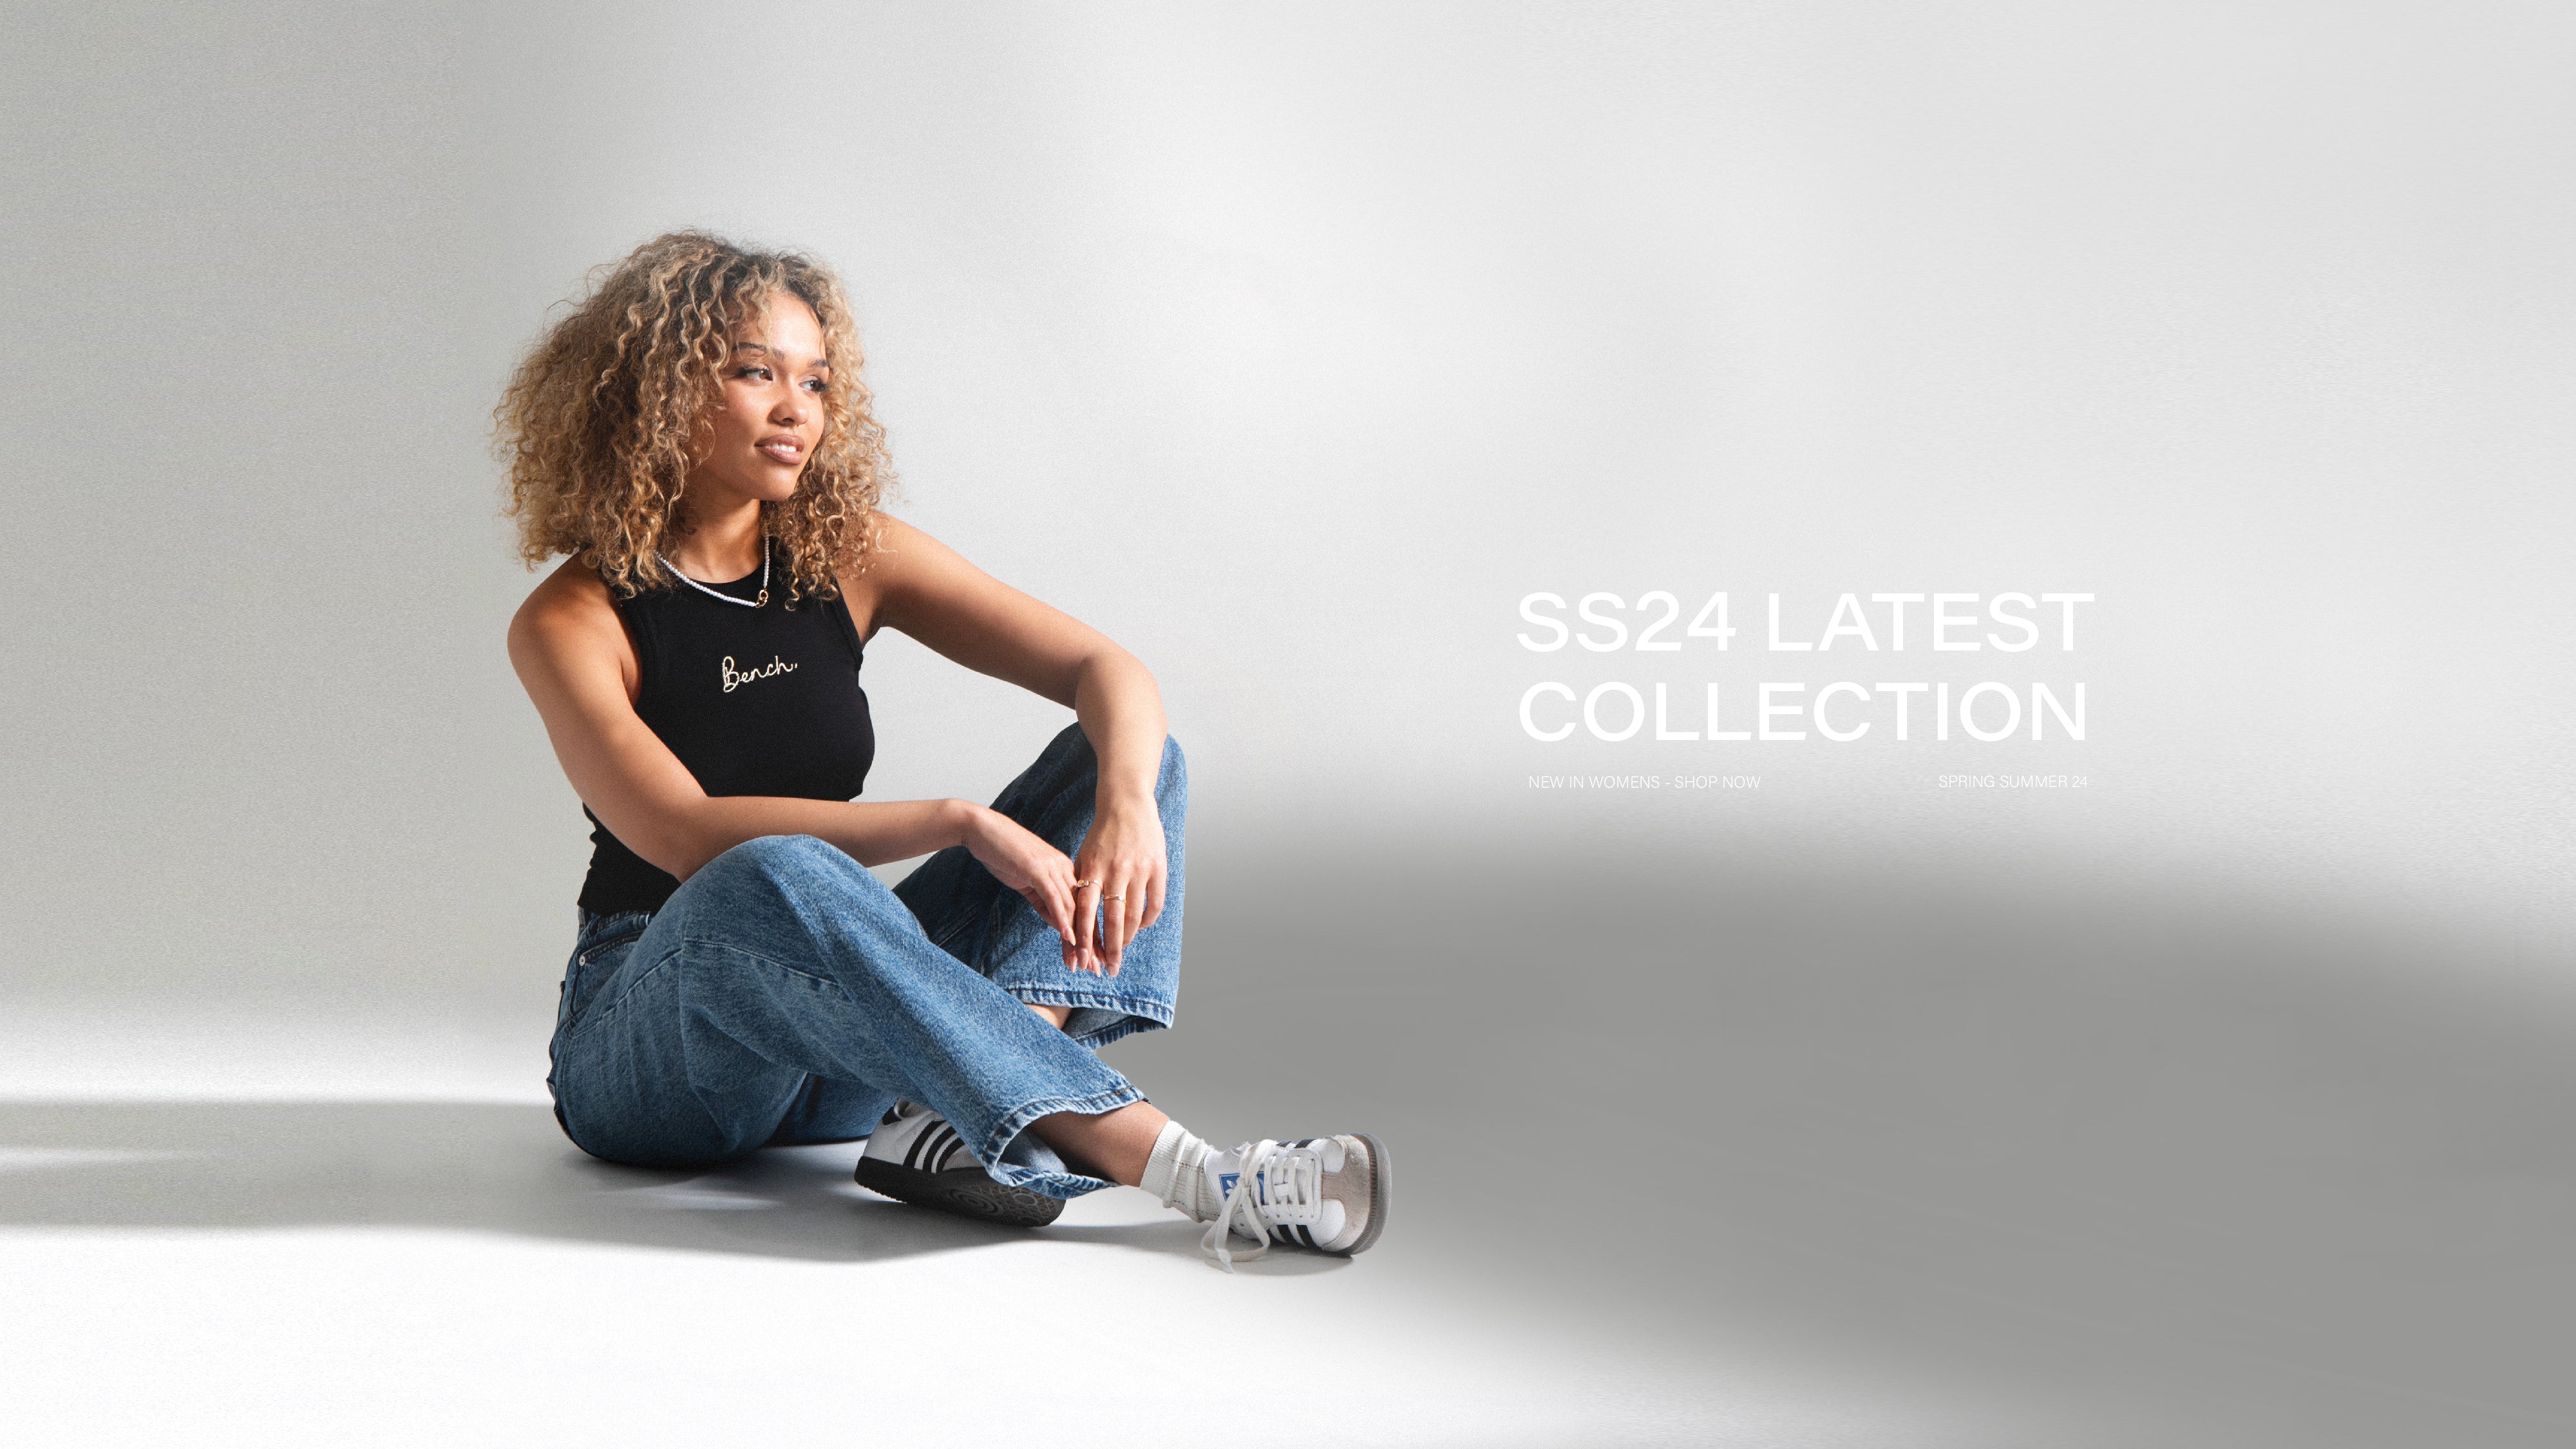 Bench/ lifestyle + clothing - New collections from BENCH/Body